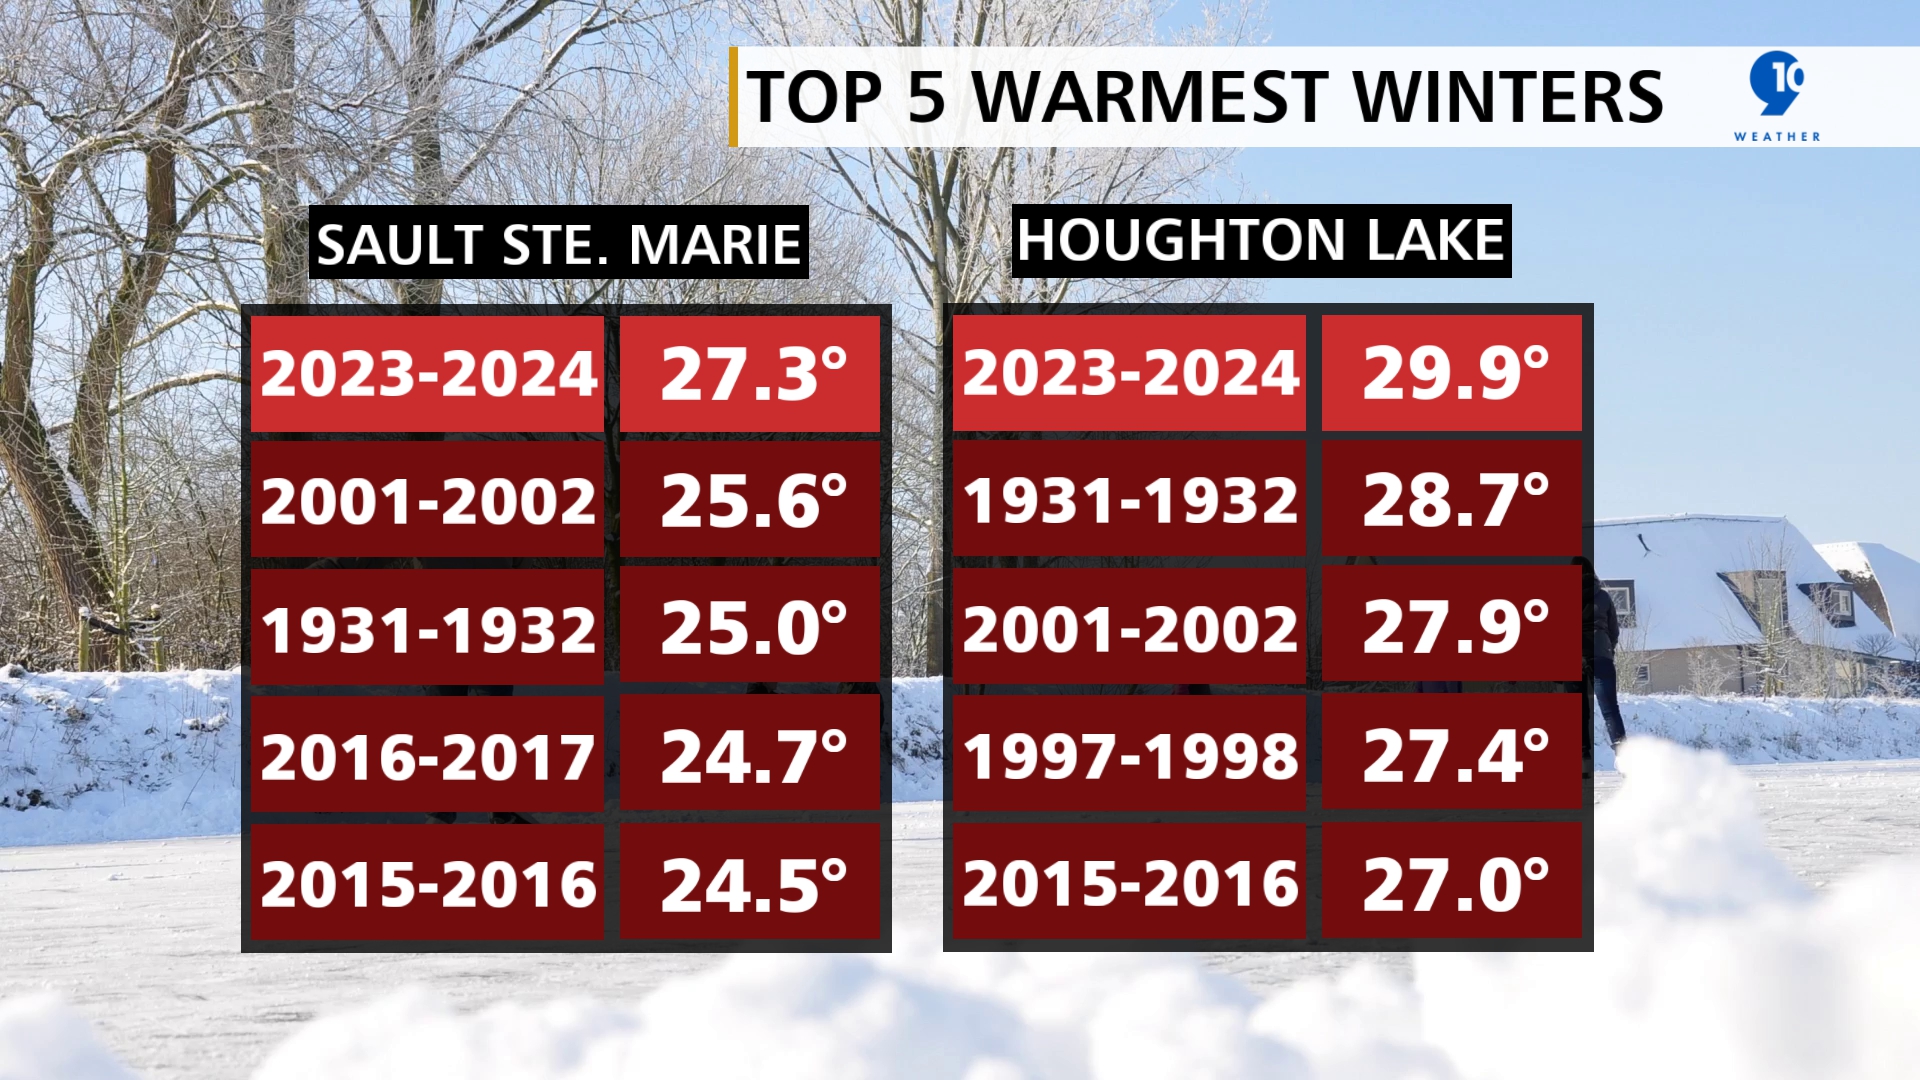 Annual Average Temperatures (Dec-Feb) for Sault Ste. Marie and Houghton Lake